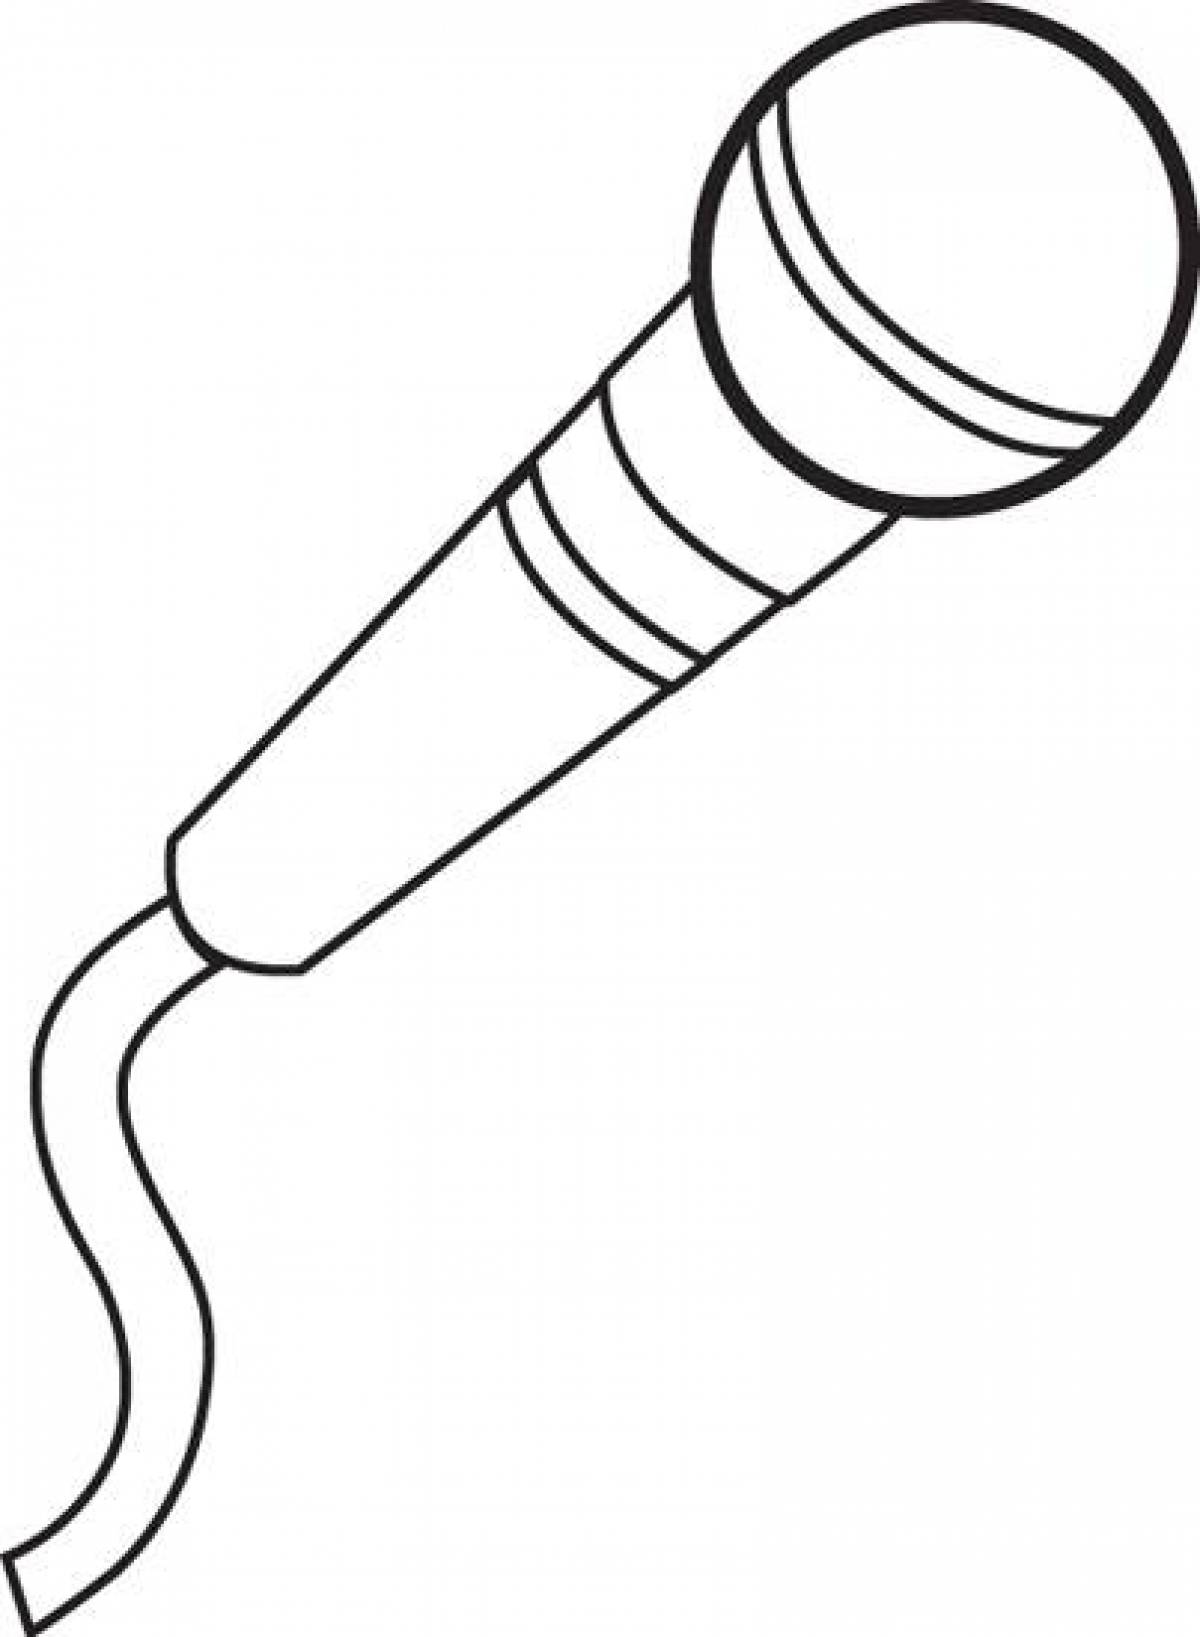 Glowing microphone coloring page